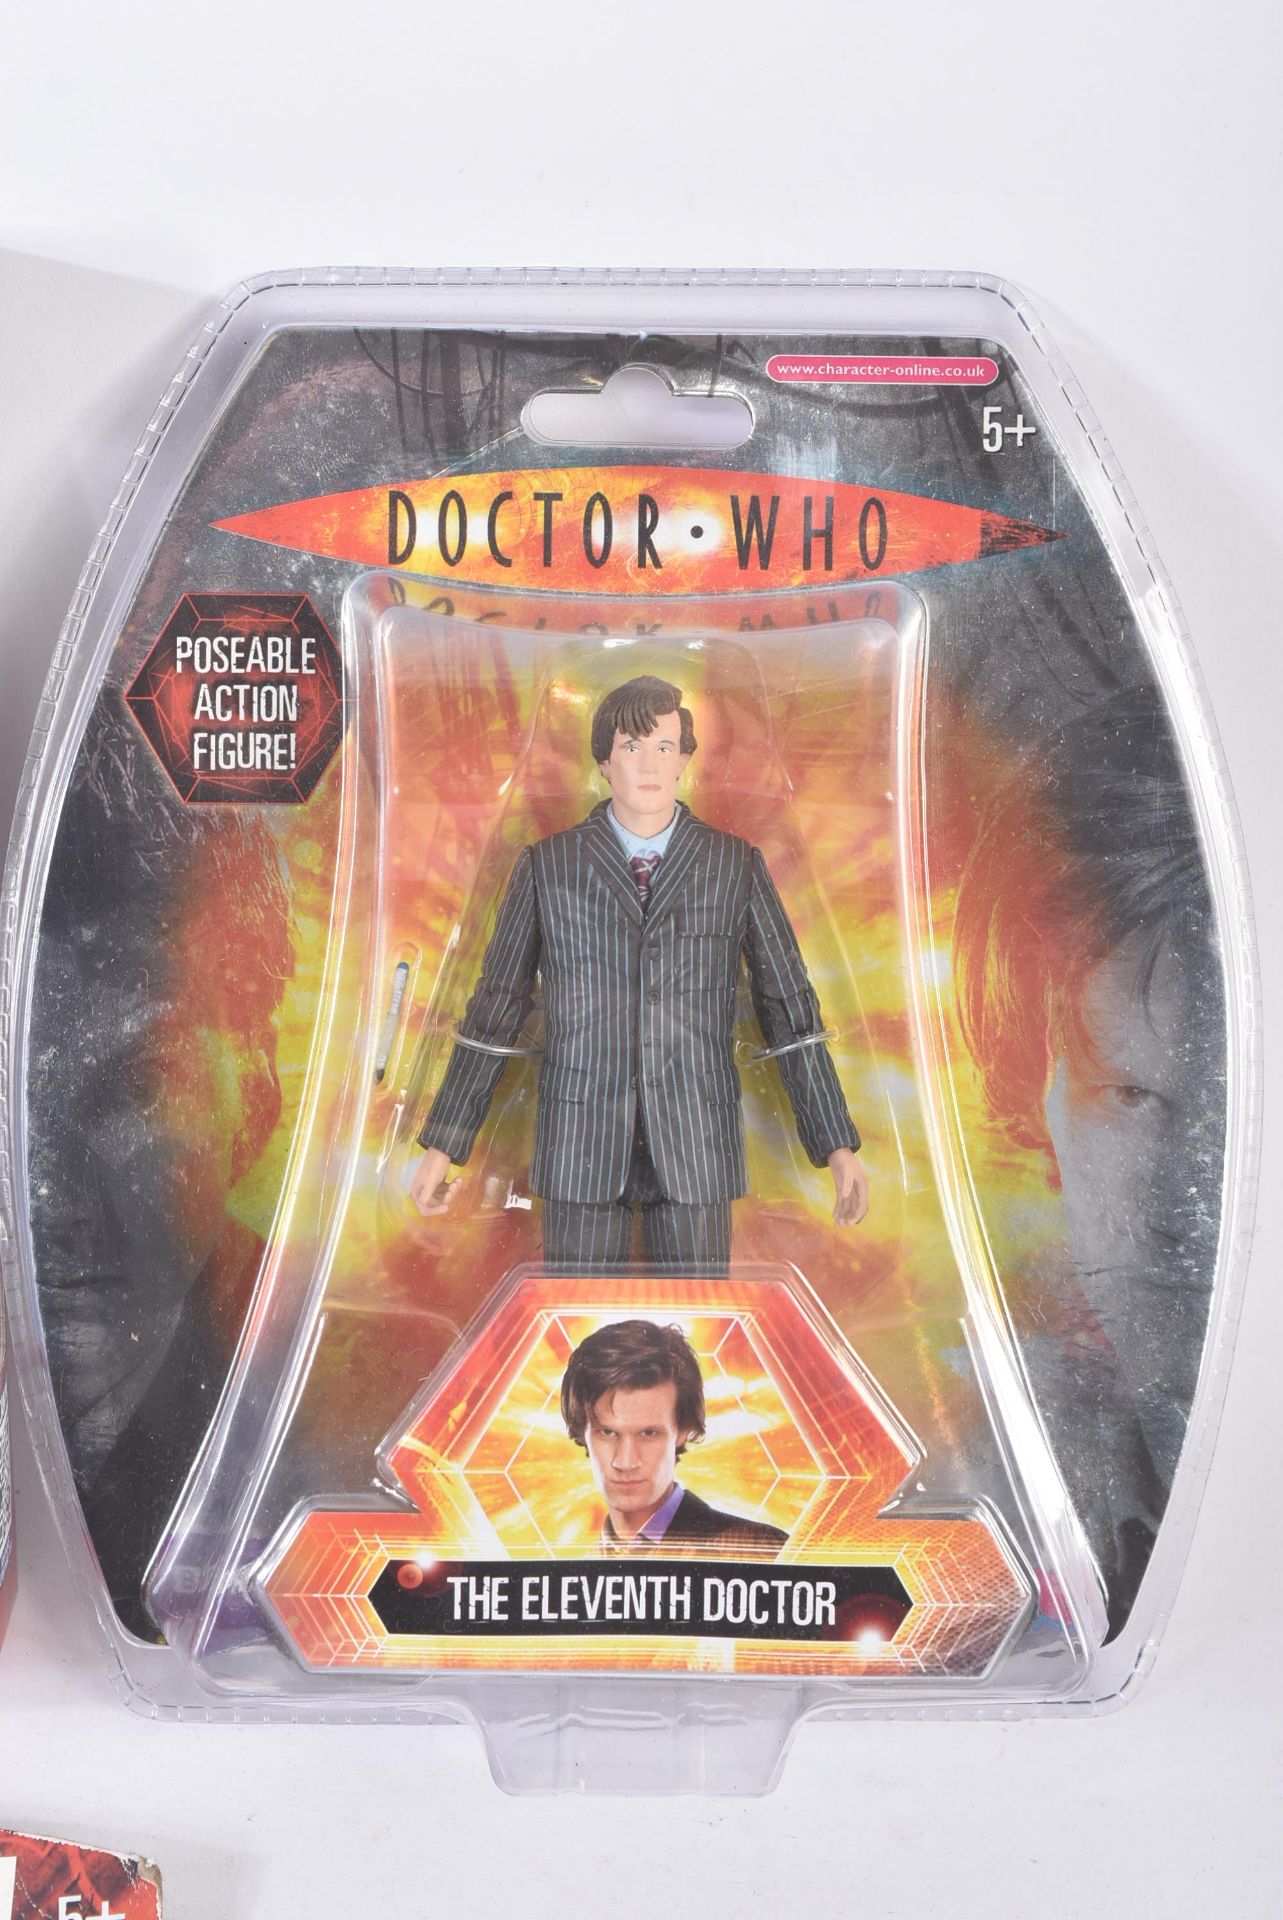 DOCTOR WHO - THE DOCTORS - COLLECTION OF ACTION FIGURES - Image 4 of 6